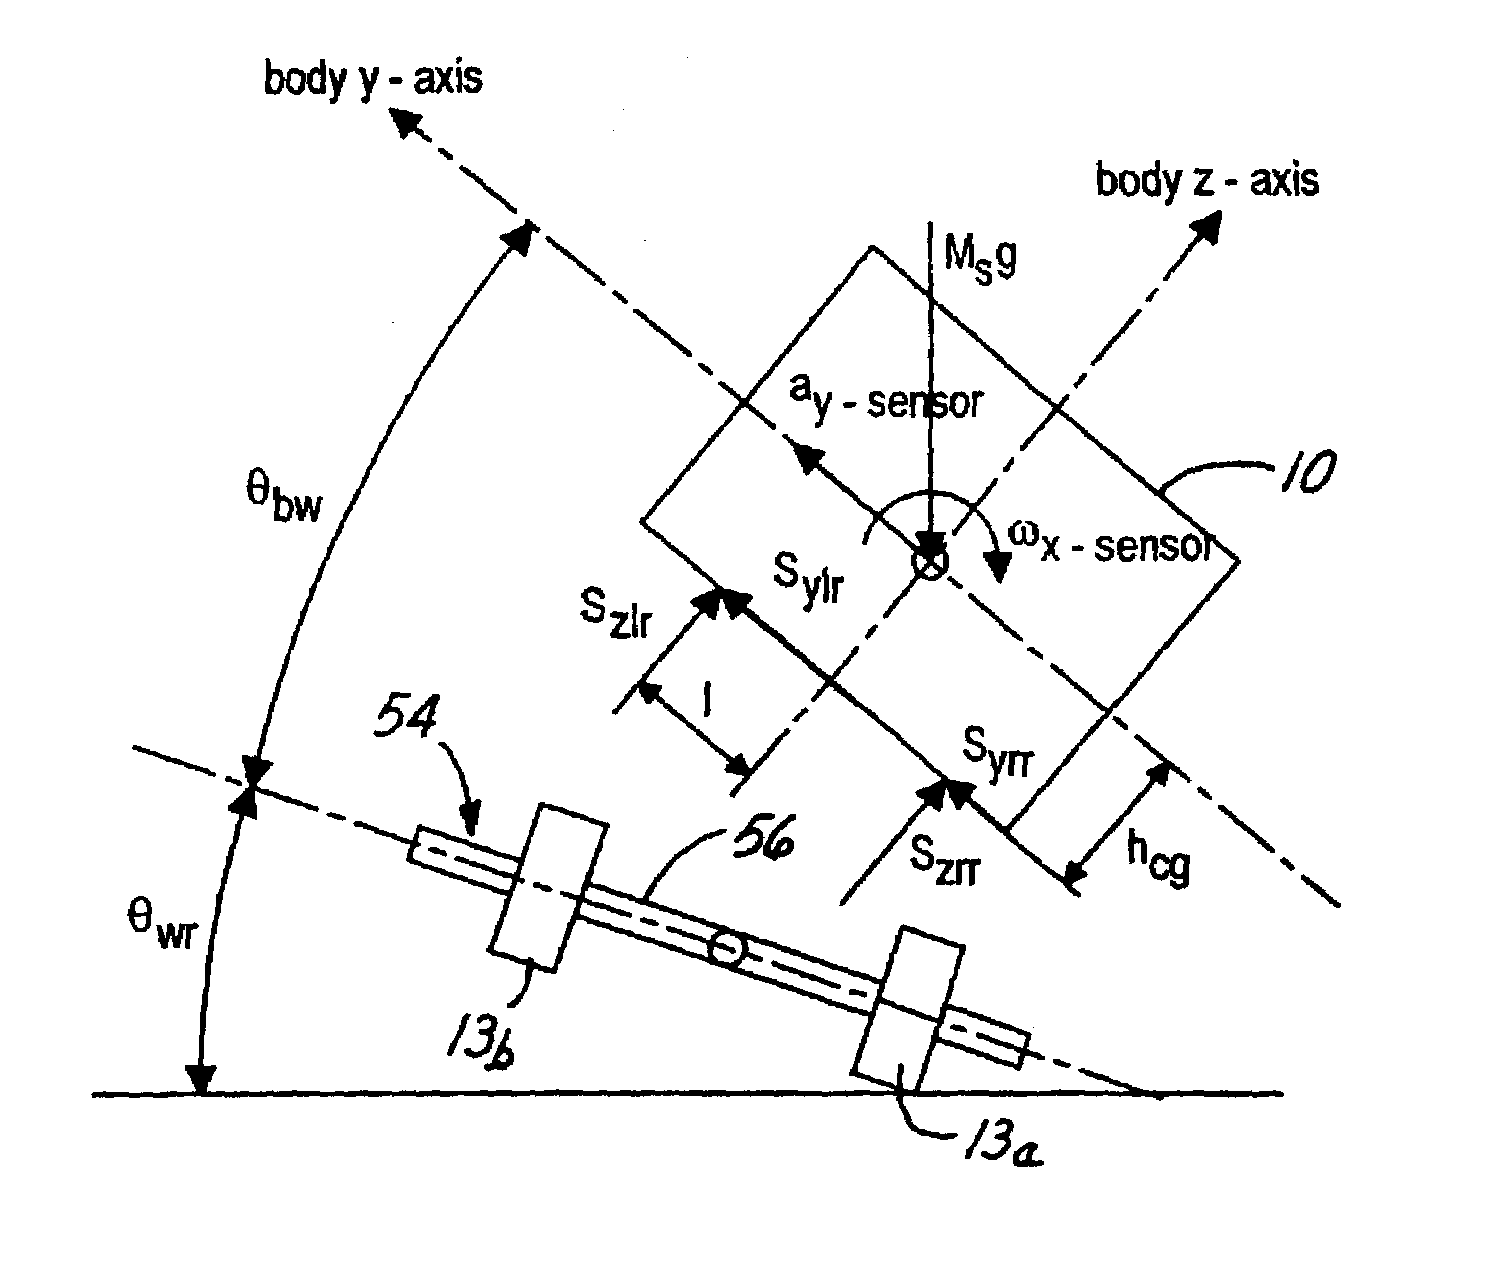 System for determining vehicular relative roll angle during a potential rollover event